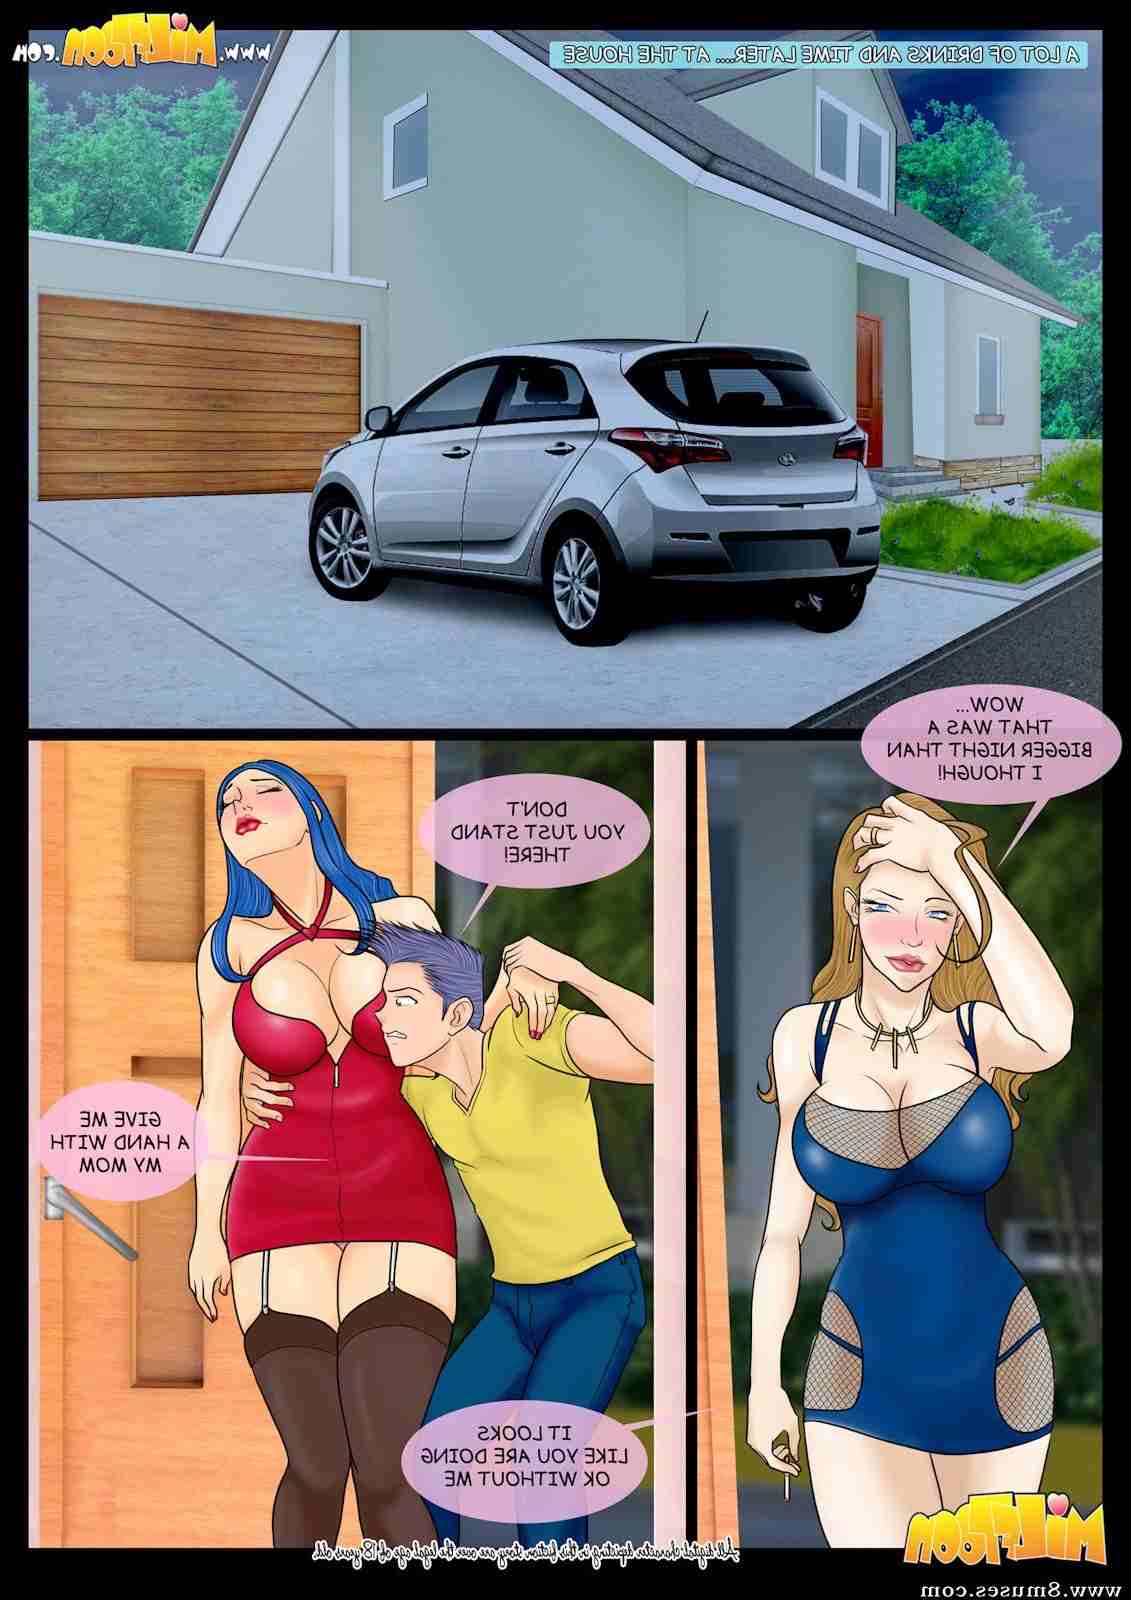 MilfToon-Comics/The-Party The_Party__8muses_-_Sex_and_Porn_Comics_4.jpg